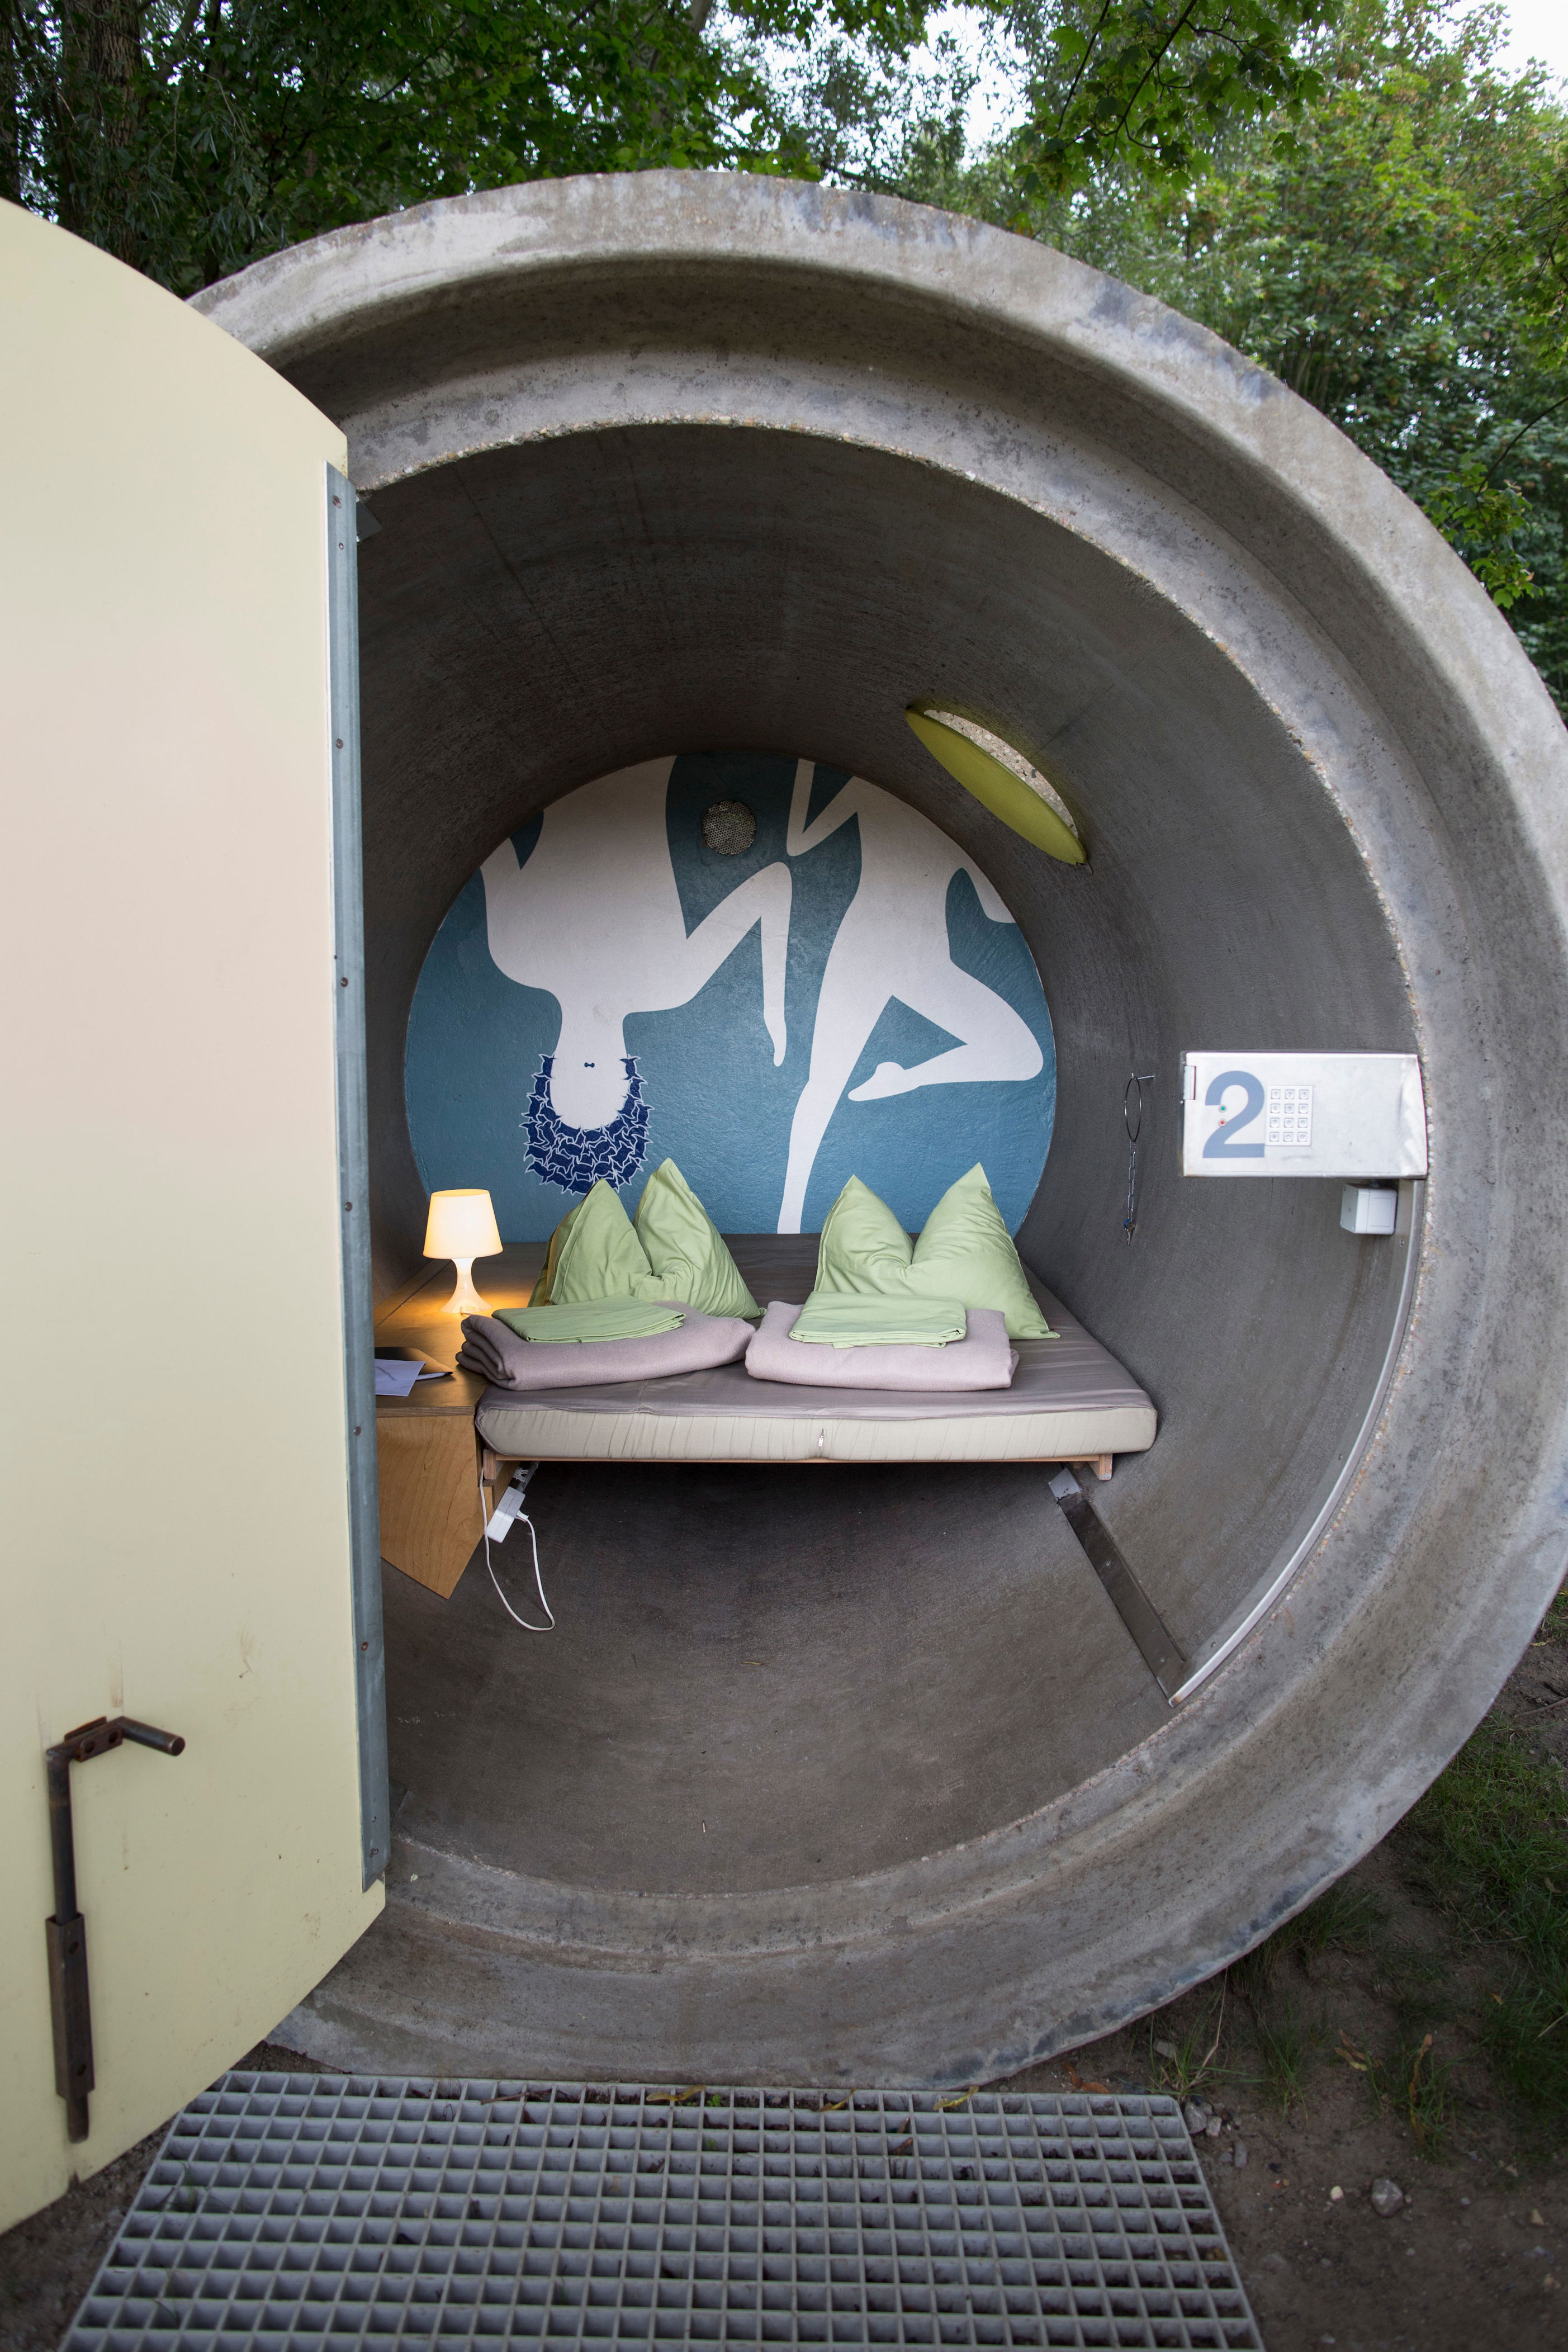 Like TuboHotel, <a href="https://dasparkhotel.net/">Das Parkhotel</a>, with locations throughout Germany, offers the opportunity to sleep in concrete tubes. Here, repurposed sewer pipes are purposefully left unadorned and minimalistic on the exterior, with surprising modern comforts on the inside. The hotel promises enough headroom as well as a full-size bed, in addition to storage space, electricity, and wool blankets.<br> <br> <em>Book now: <a href="https://dasparkhotel.net/">Das Parkhotel</a></em><p>Sign up for our newsletter to get the latest in design, decorating, celebrity style, shopping, and more.</p><a href="https://www.architecturaldigest.com/newsletter/subscribe?sourceCode=msnsend">Sign Up Now</a>